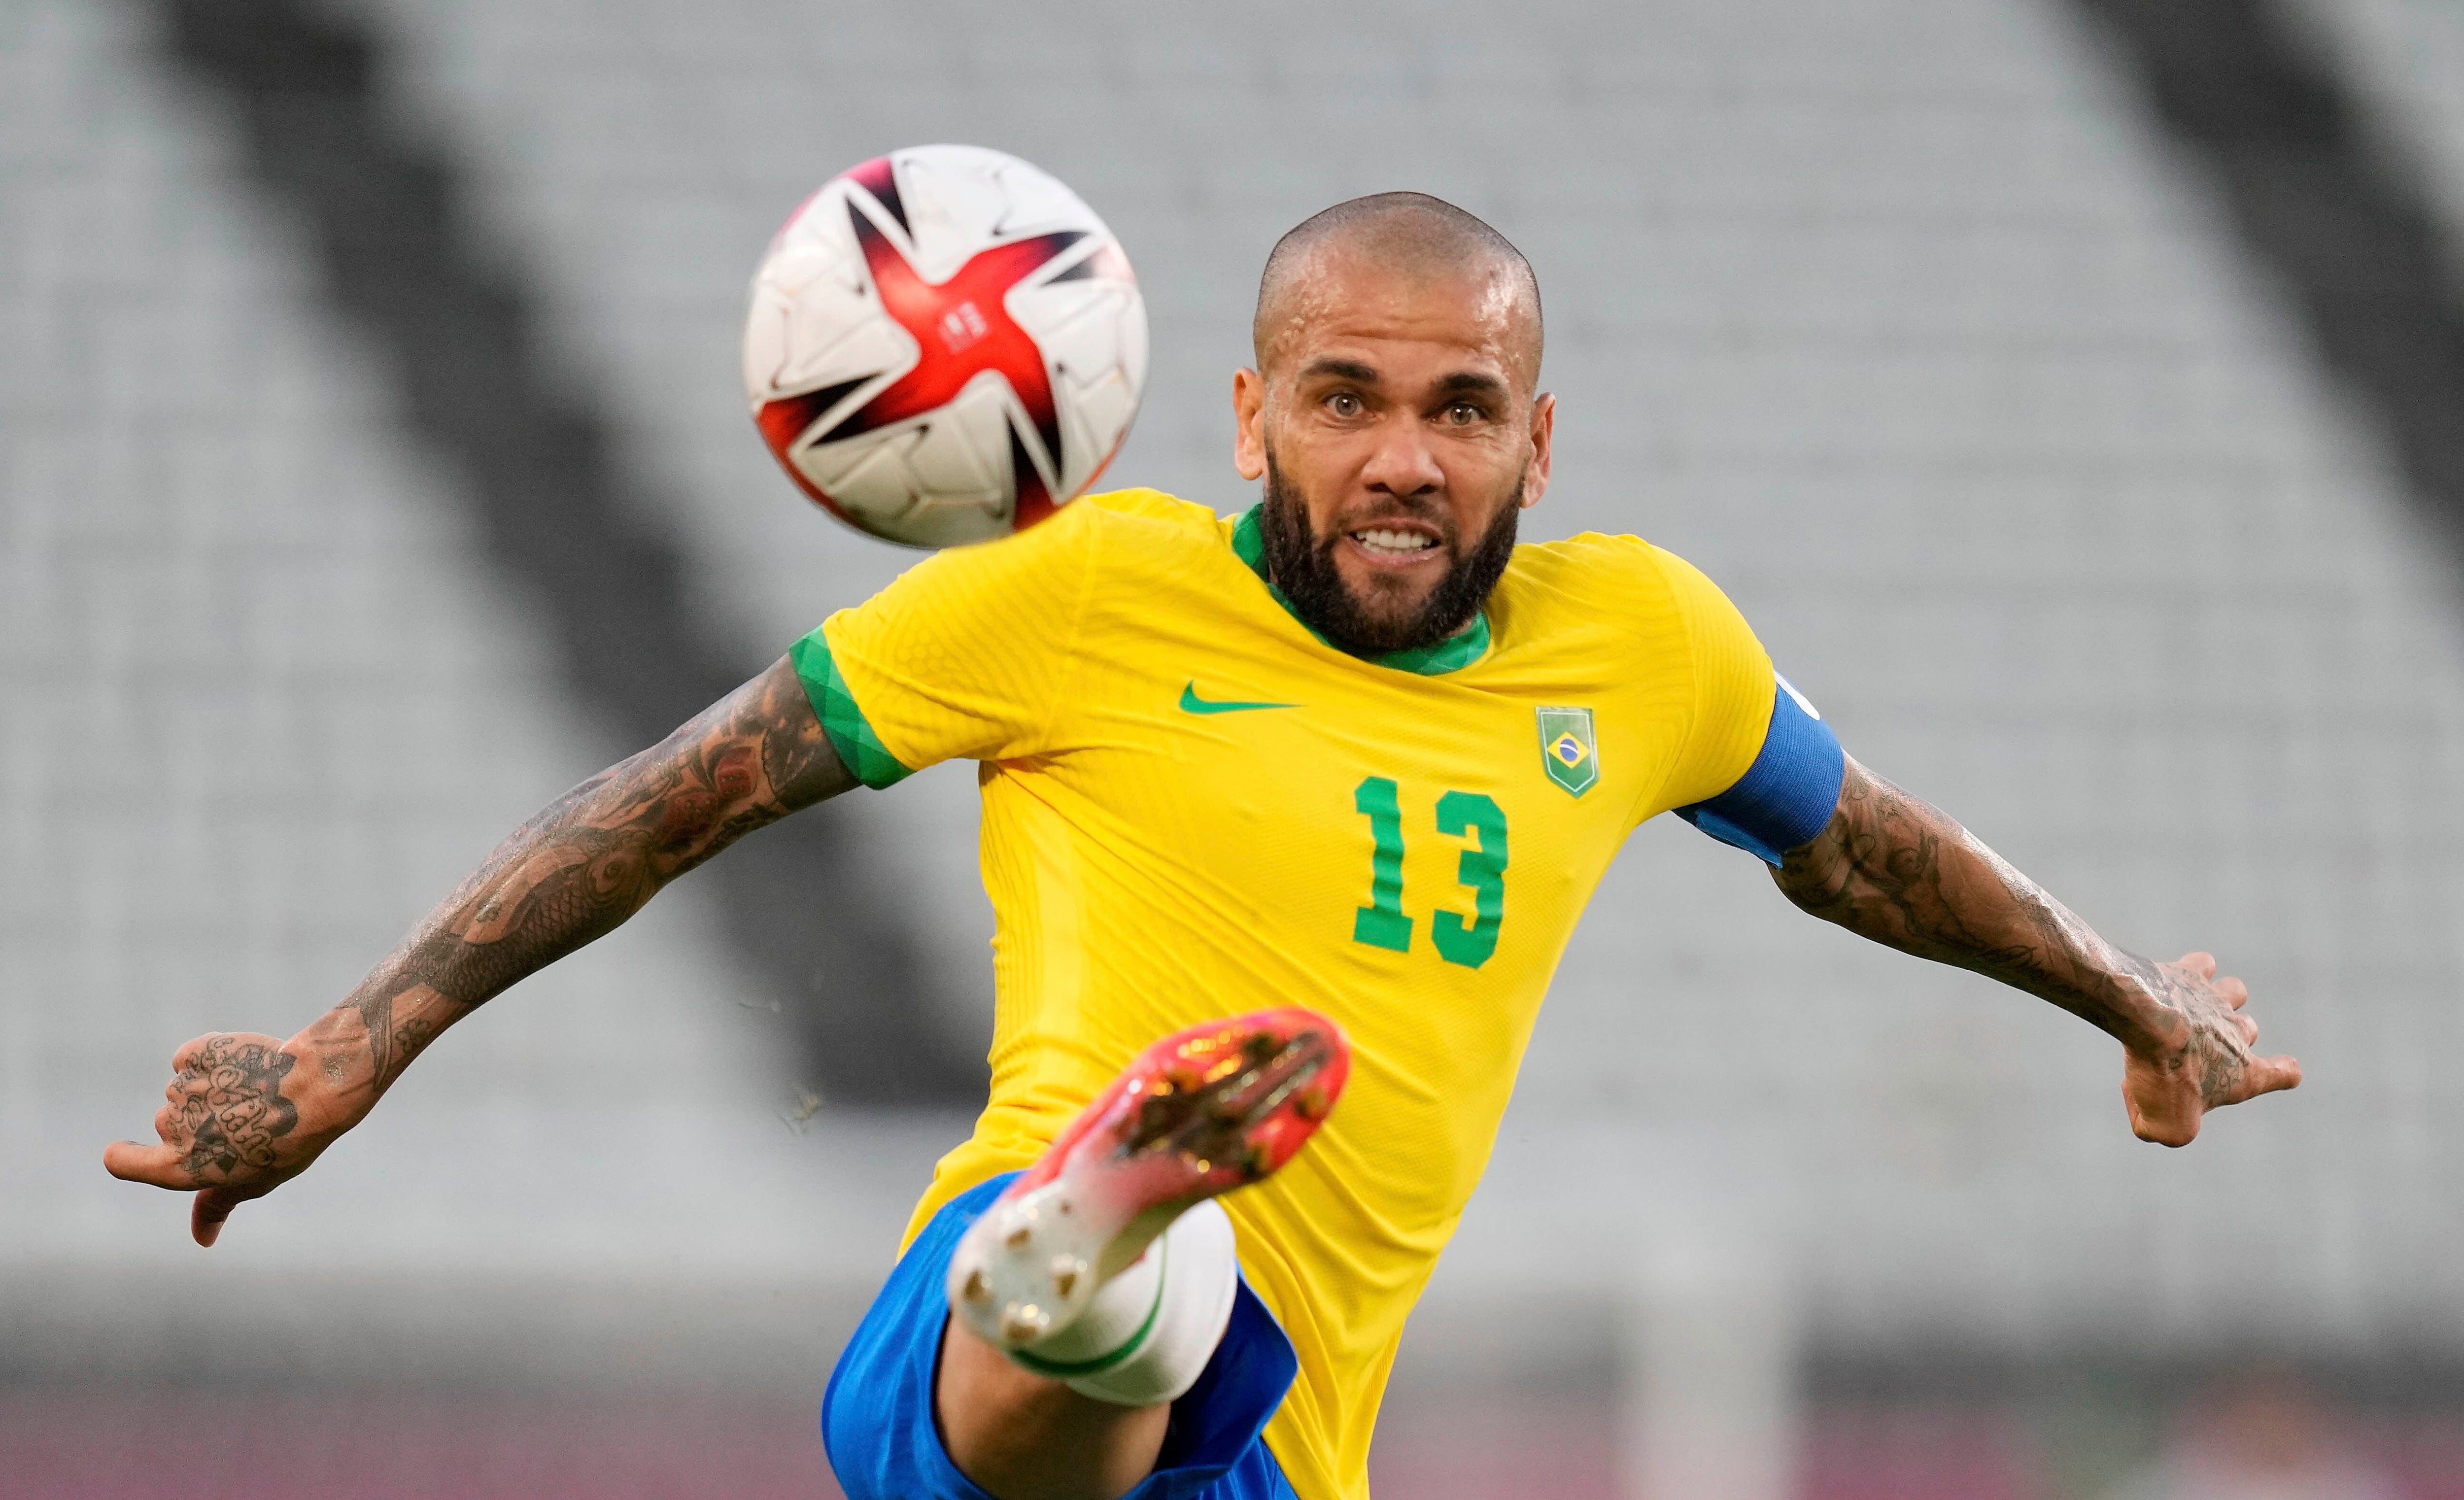 Dani Alves found guilty of rape, sentenced to four and a half years in prison - NZ Herald